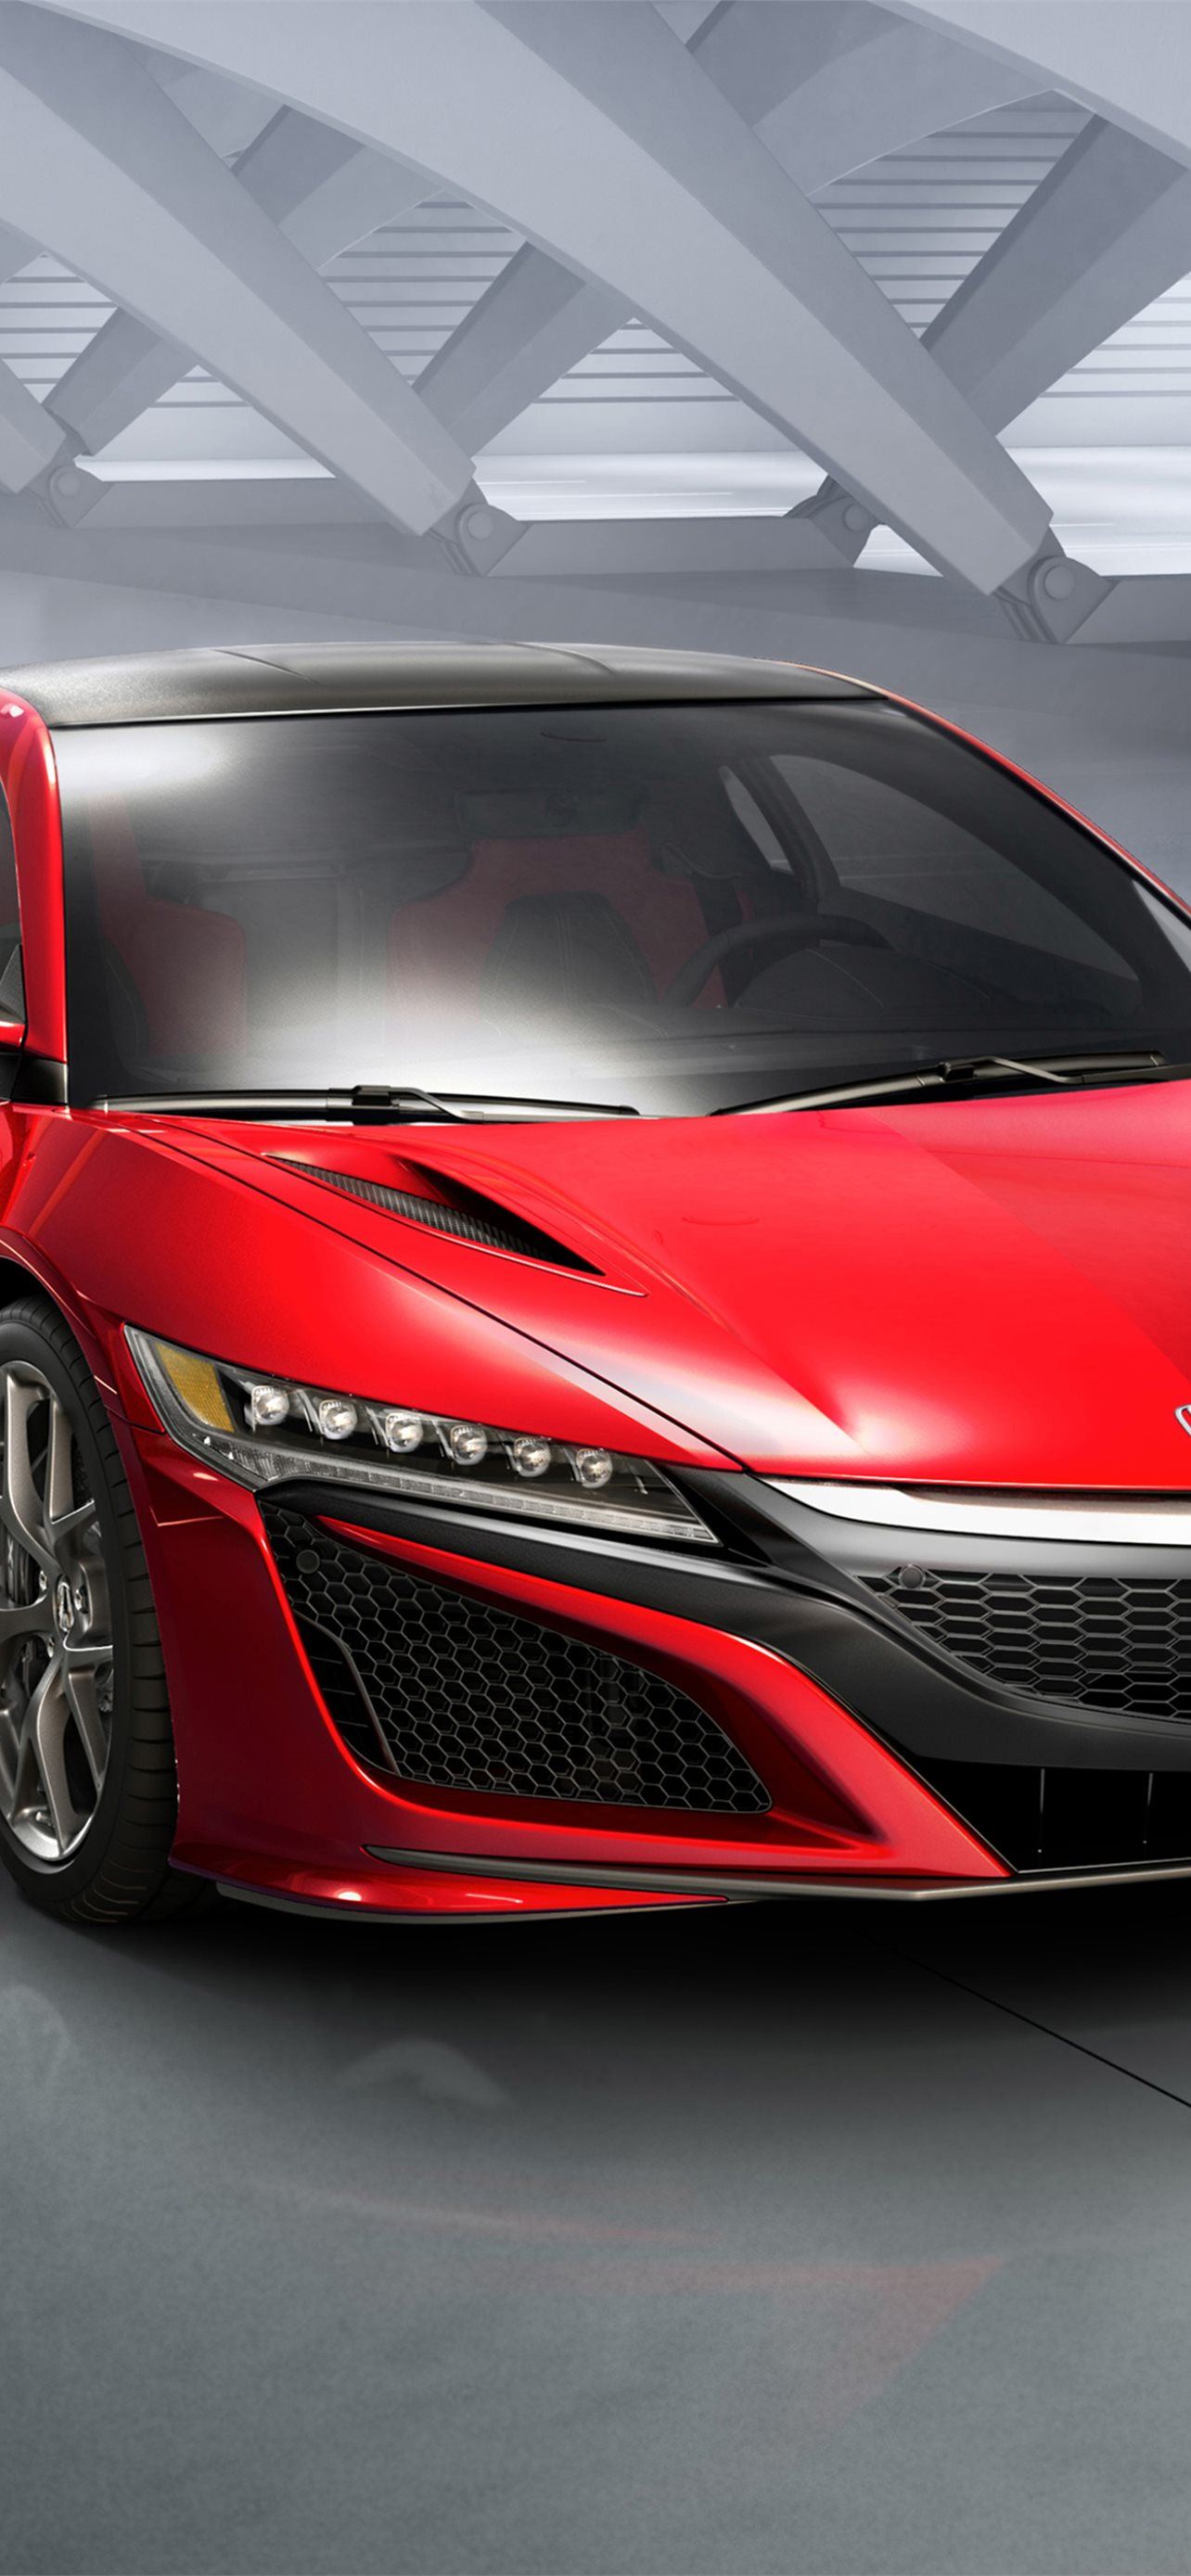 Honda Nsx Samsung Galaxy Note 9 8 S9 S8 S8 Qhd Hd Iphone Wallpapers Free Download